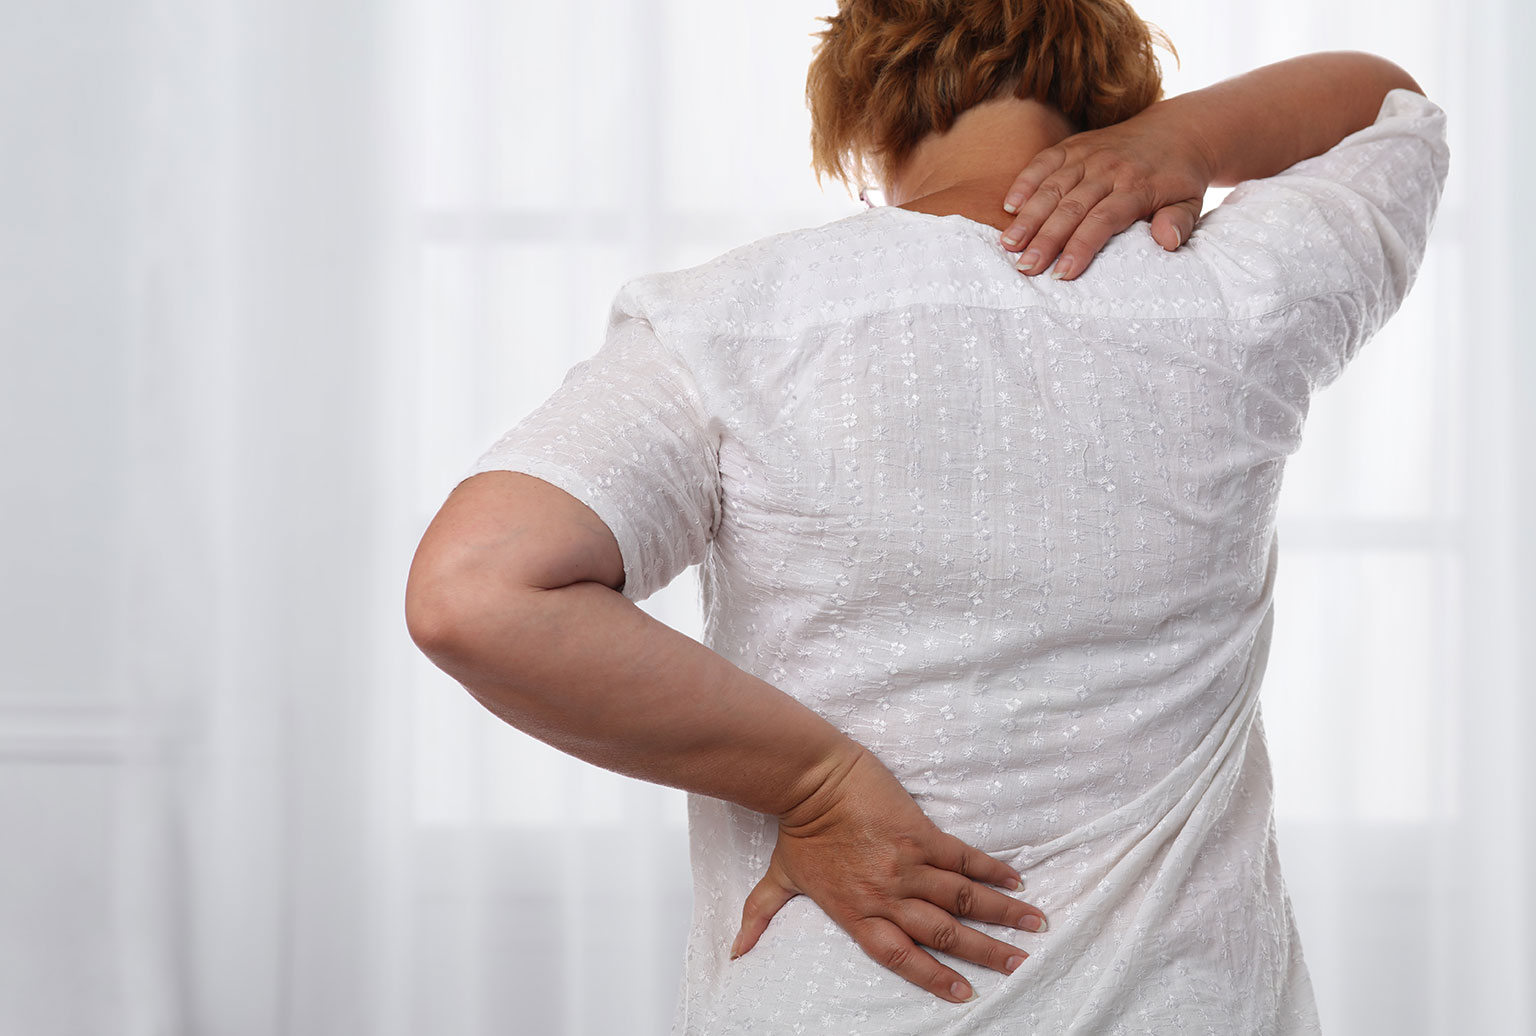 Devices to protect caregivers from back pain and injury - Seasons